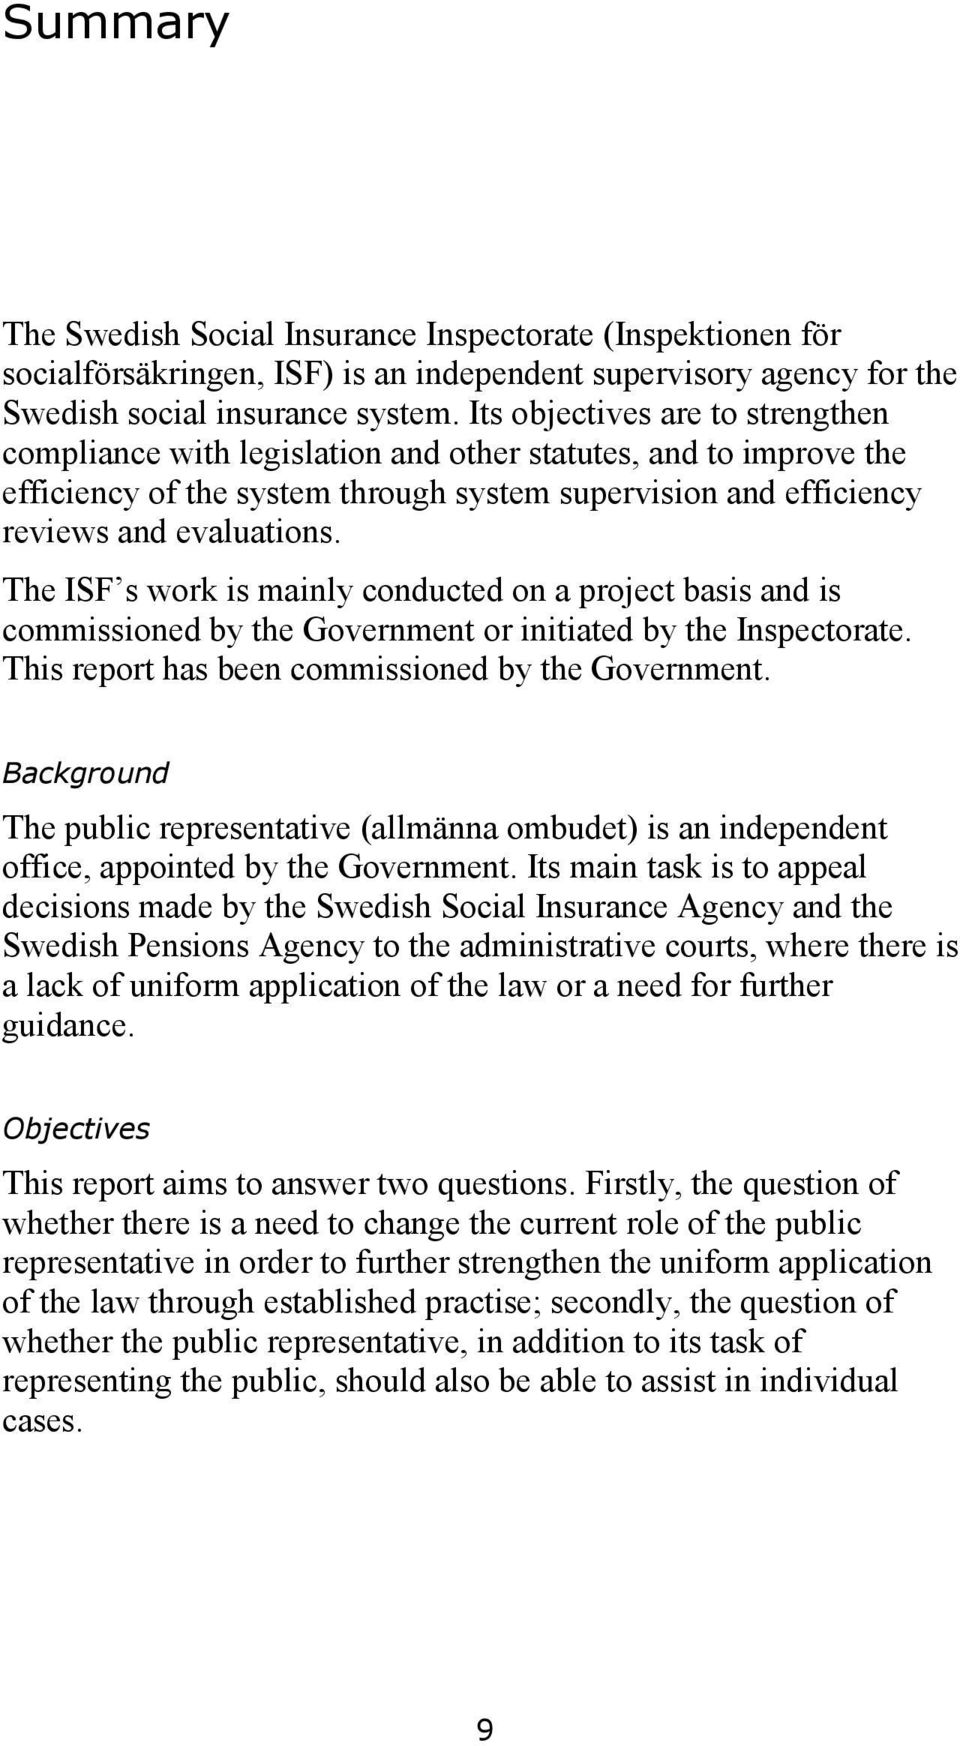 The ISF s work is mainly conducted on a project basis and is commissioned by the Government or initiated by the Inspectorate. This report has been commissioned by the Government.